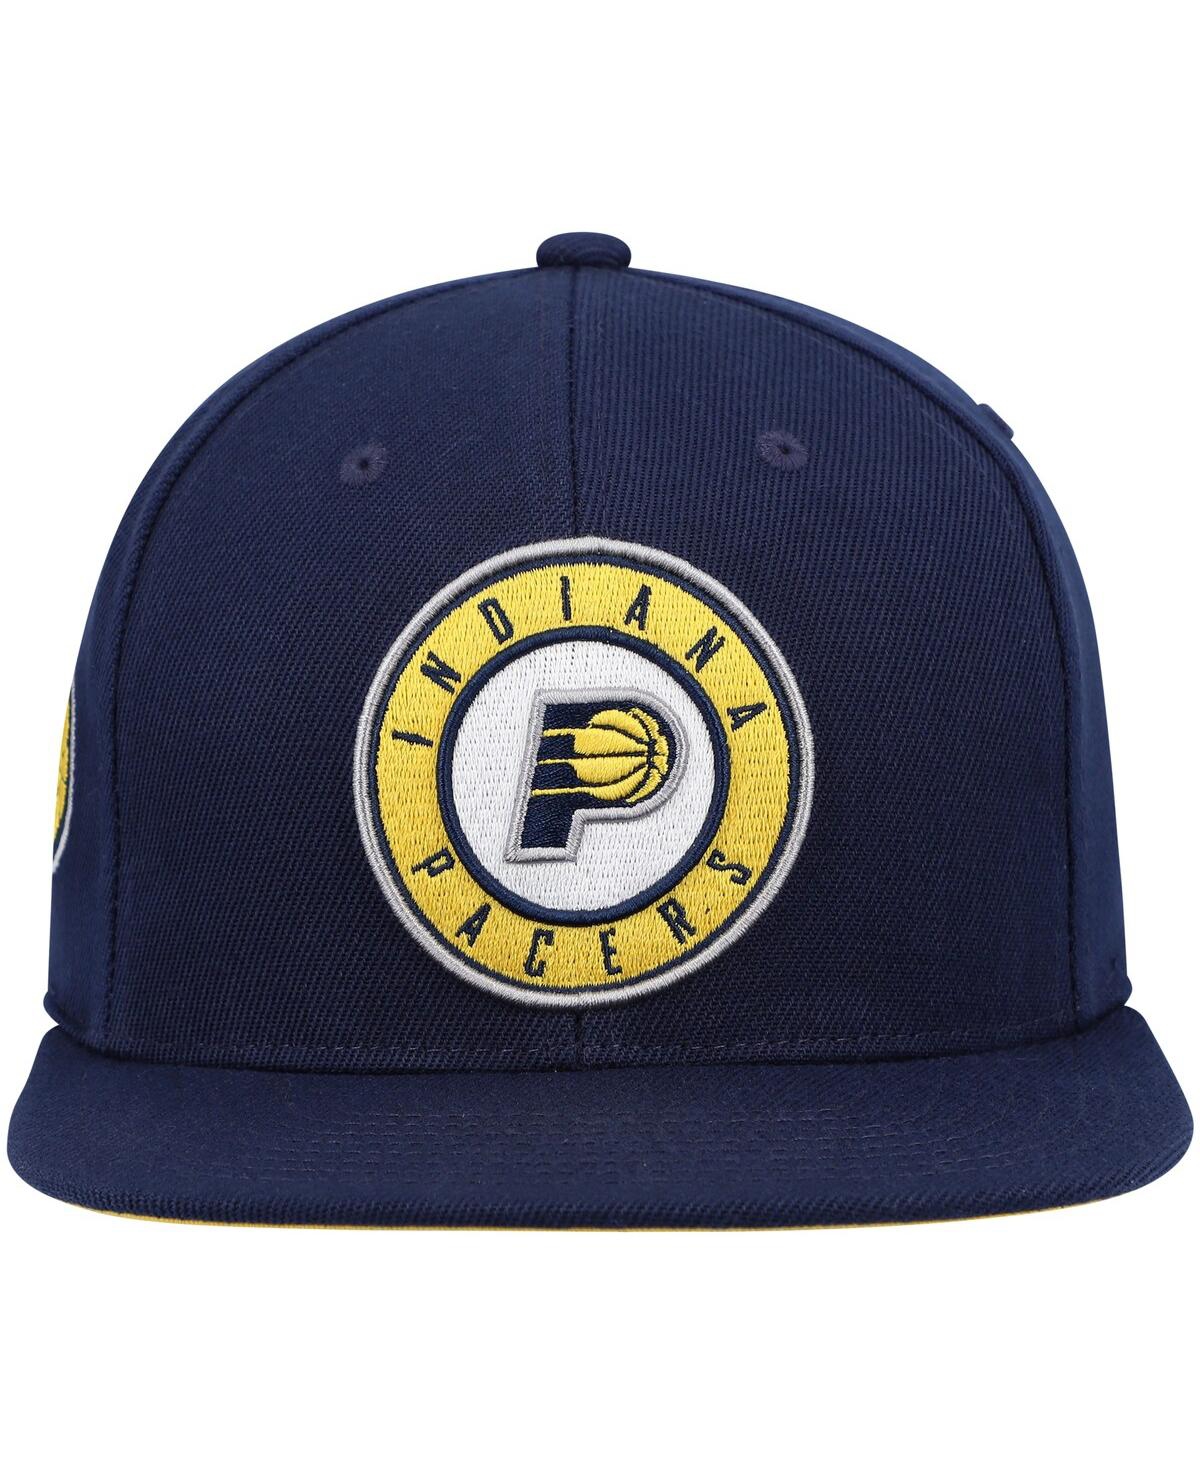 Shop Mitchell & Ness Men's  Navy Indiana Pacers Core Side Snapback Hat